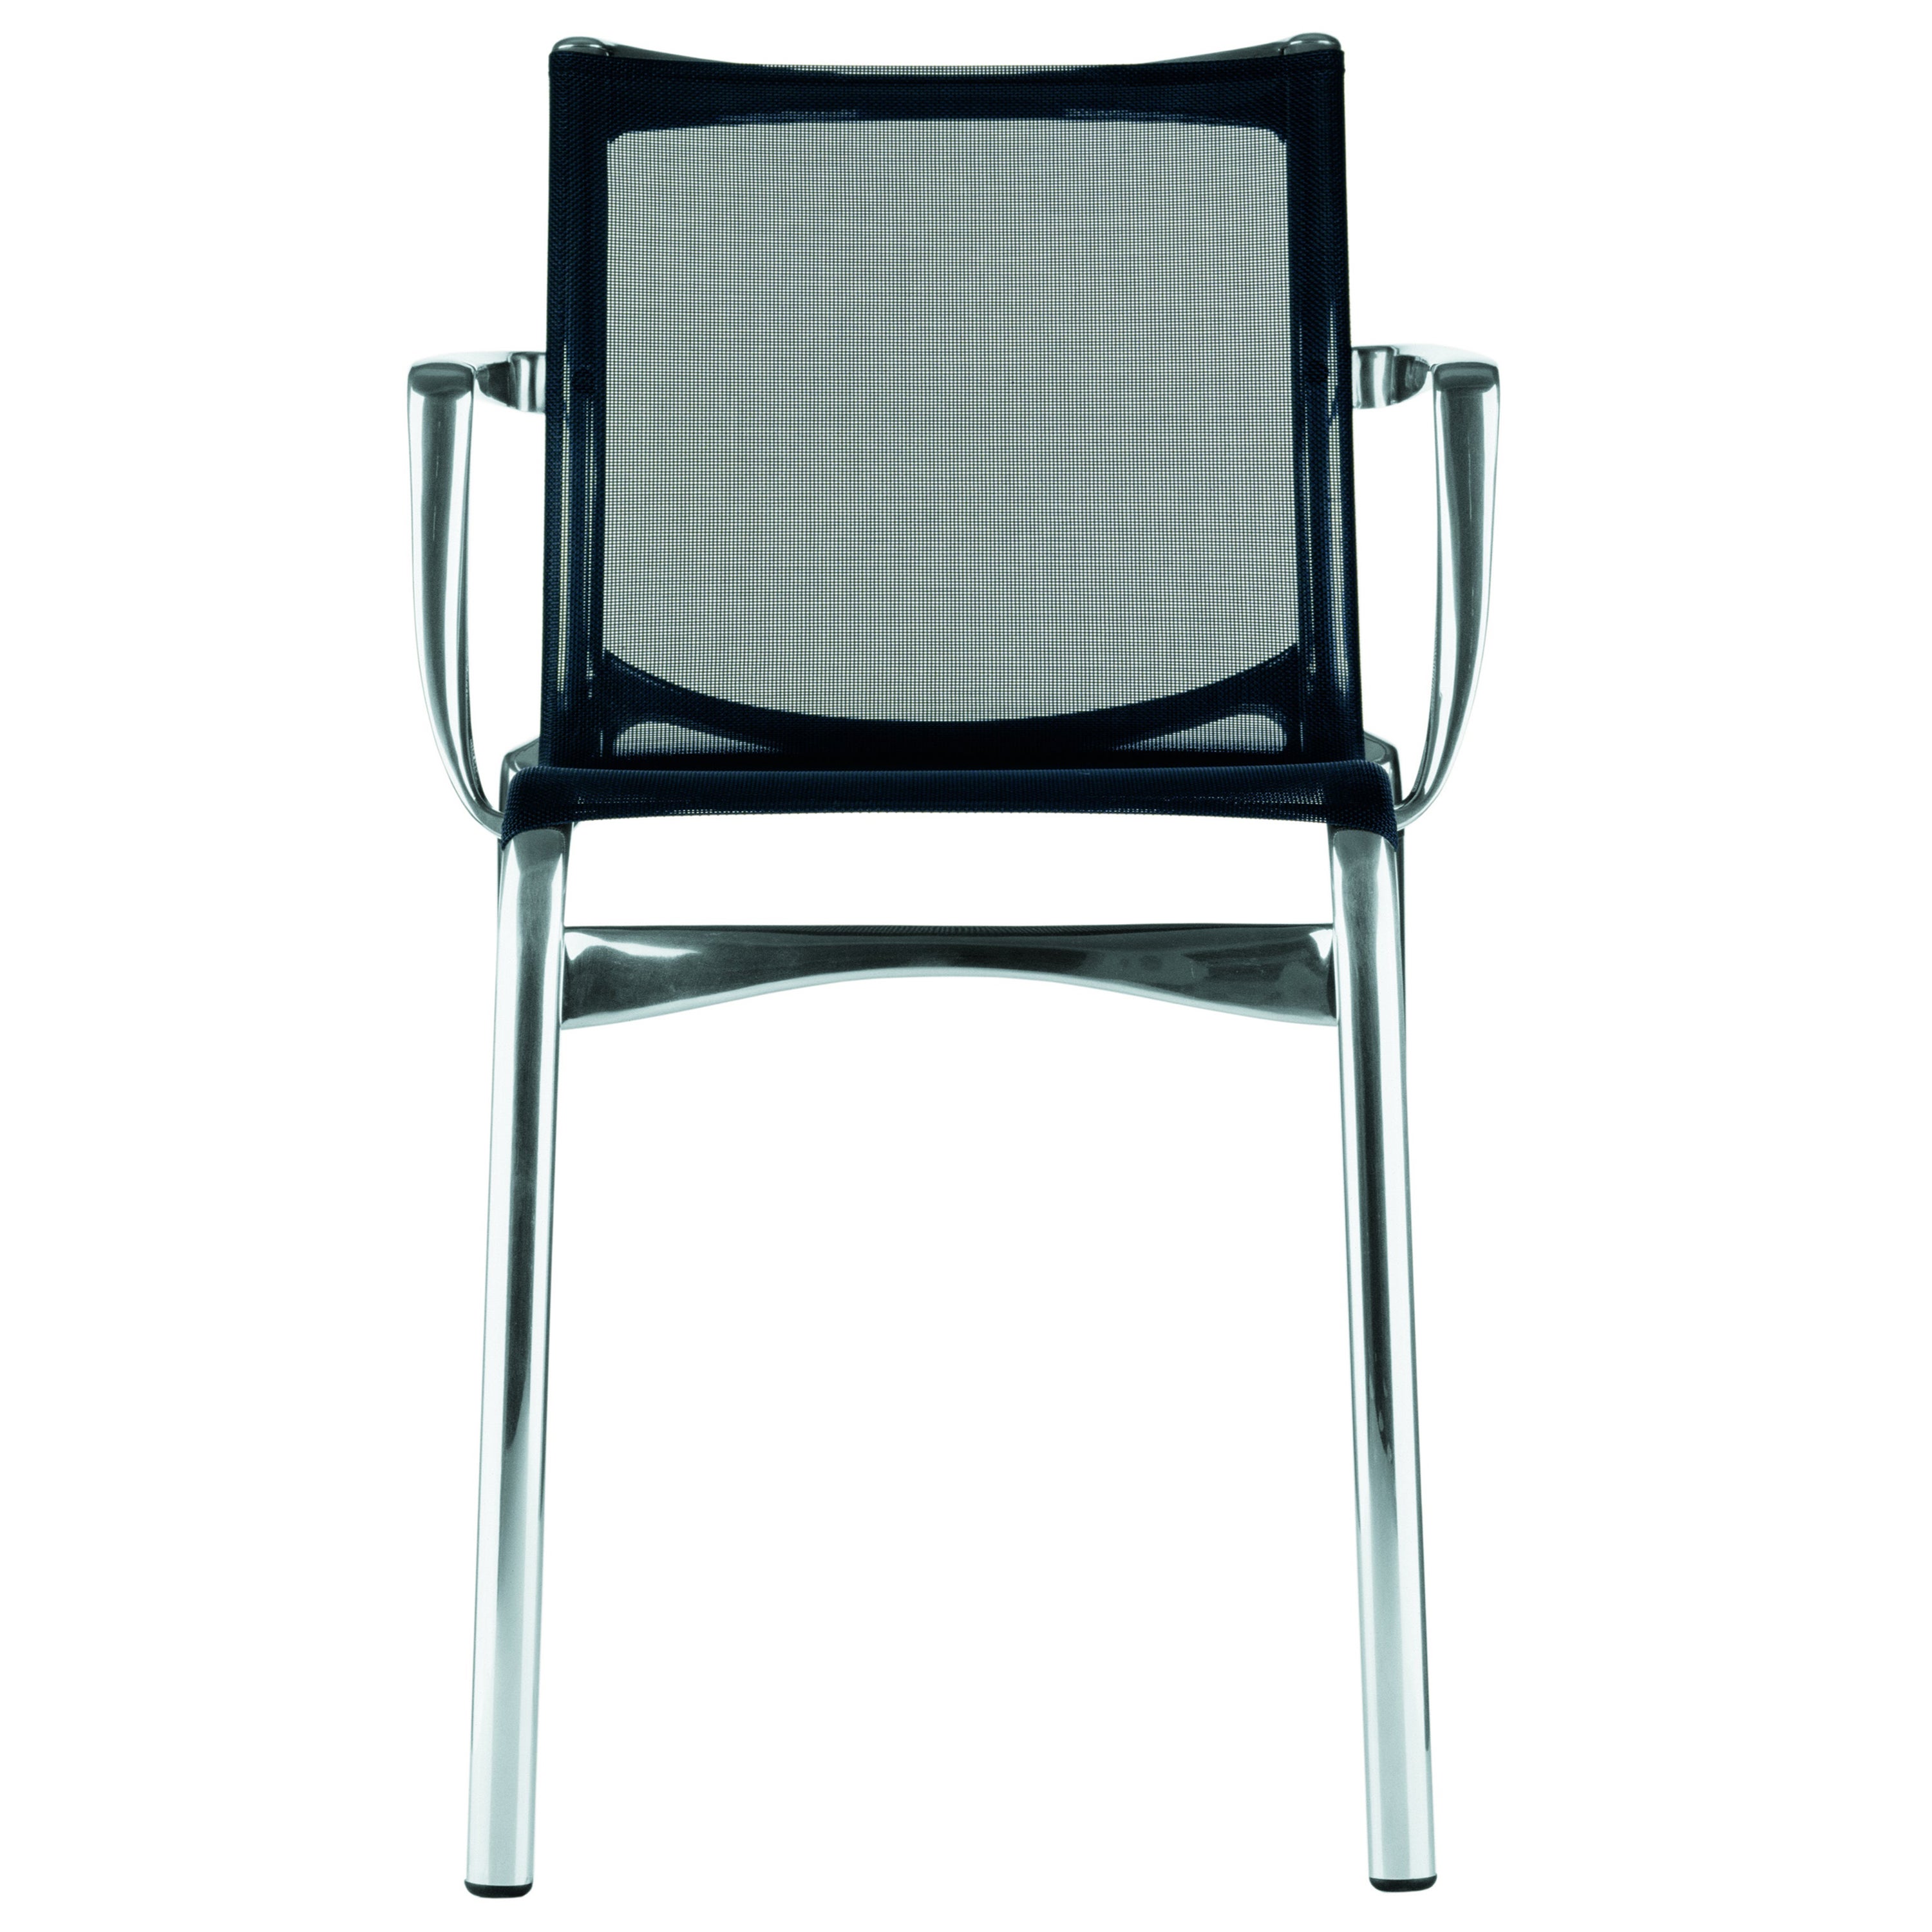 Alias 417 Highframe 40 Chair in Black Mesh Seat with Chromed Aluminium Frame For Sale